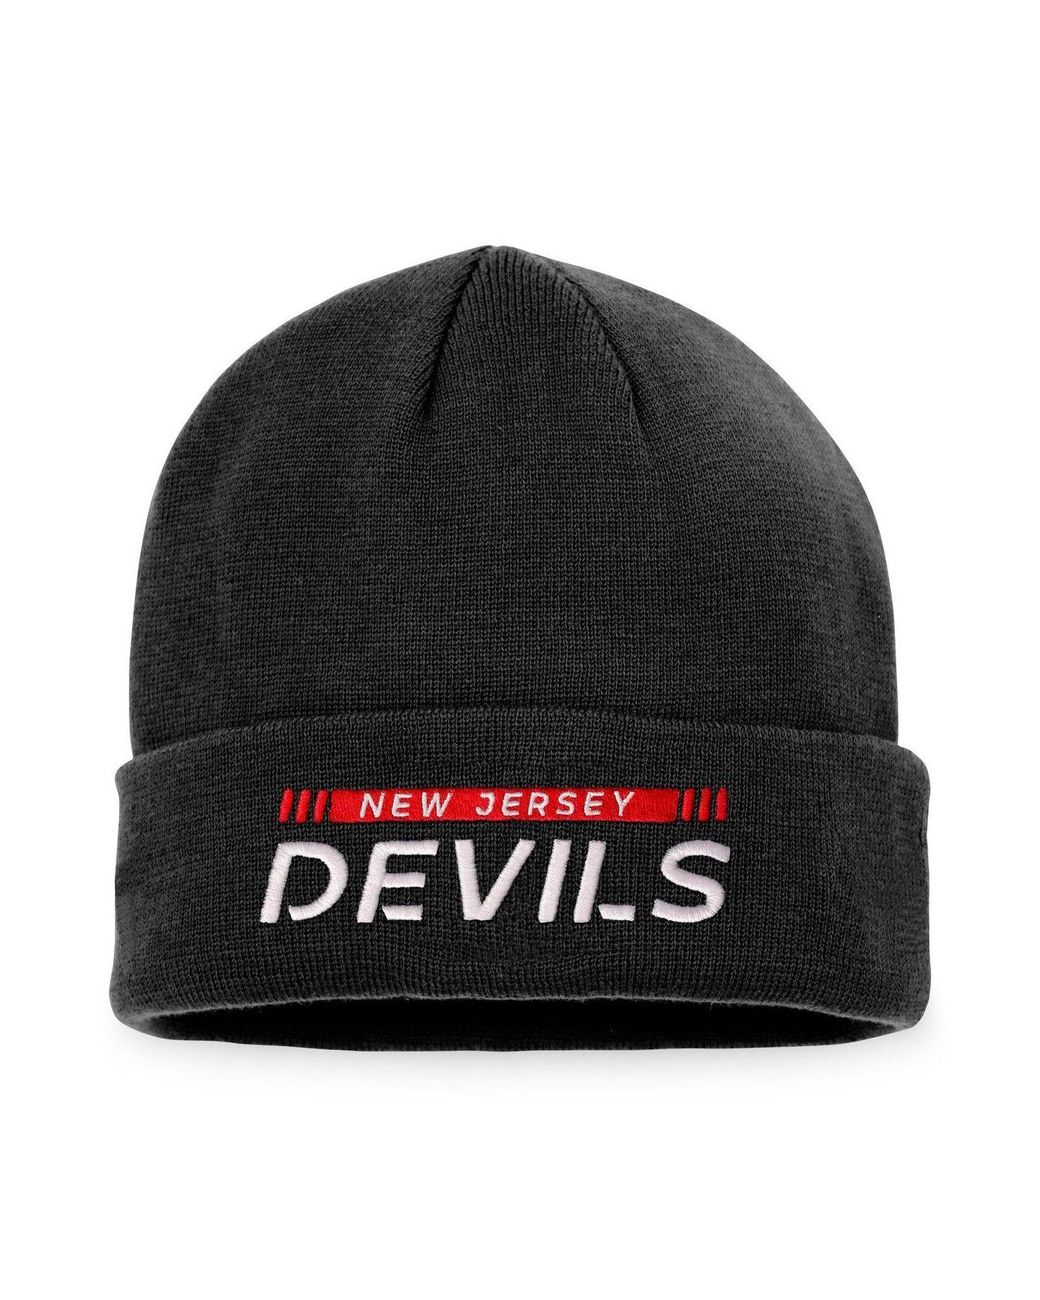 Fanatics Branded White/Red New Jersey Devils Authentic Pro Draft Cuffed Knit Hat with Pom